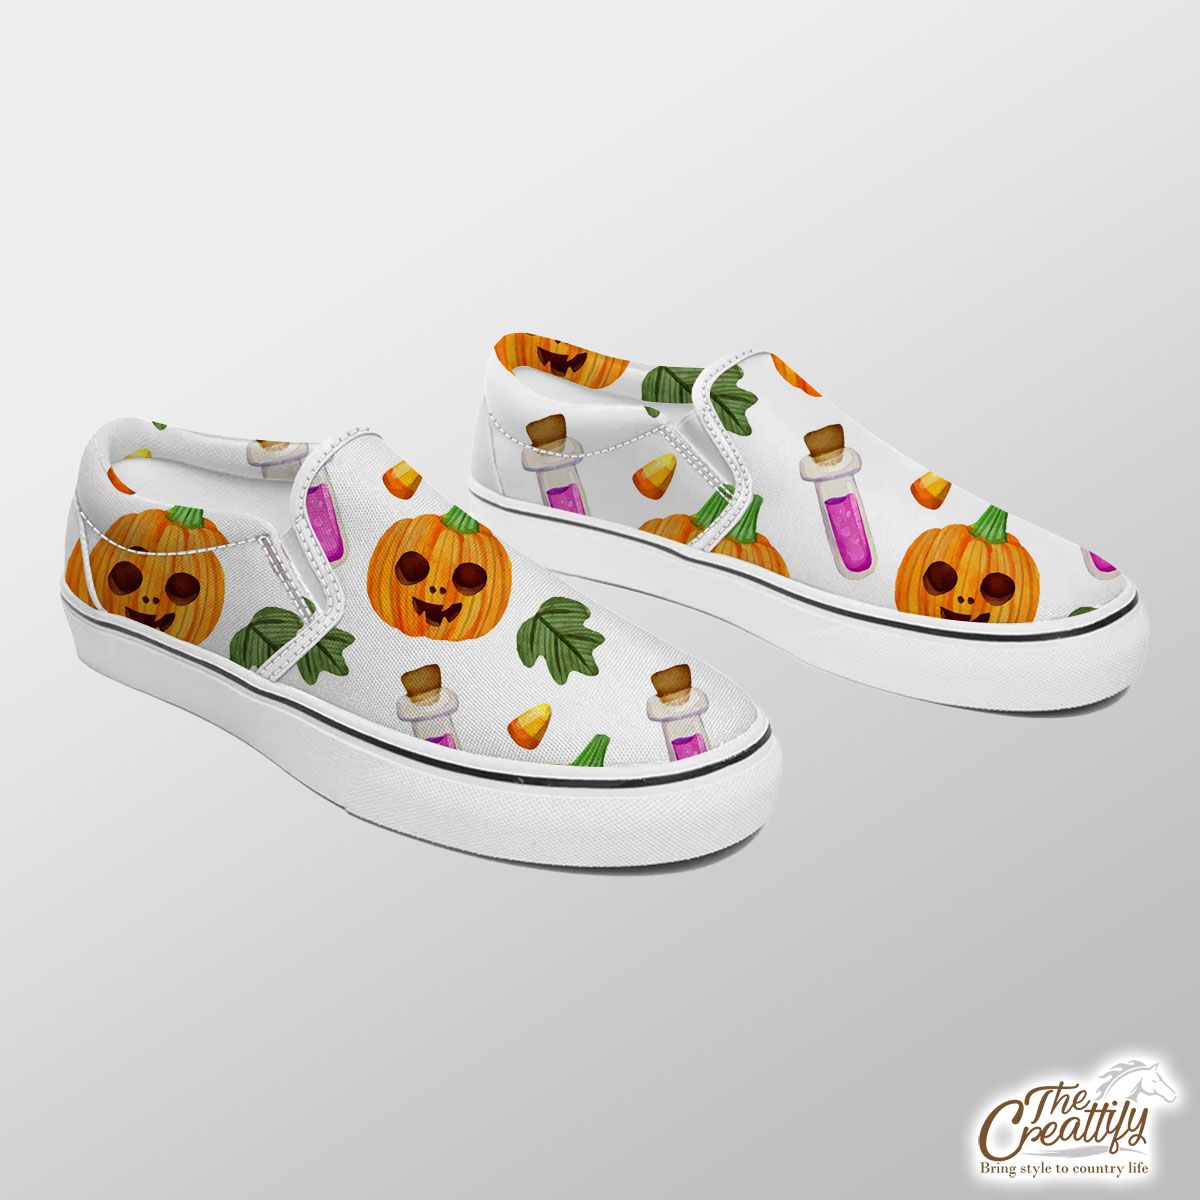 Scary Pumpkin Face and Witch Potions White Halloween Slip On Sneakers